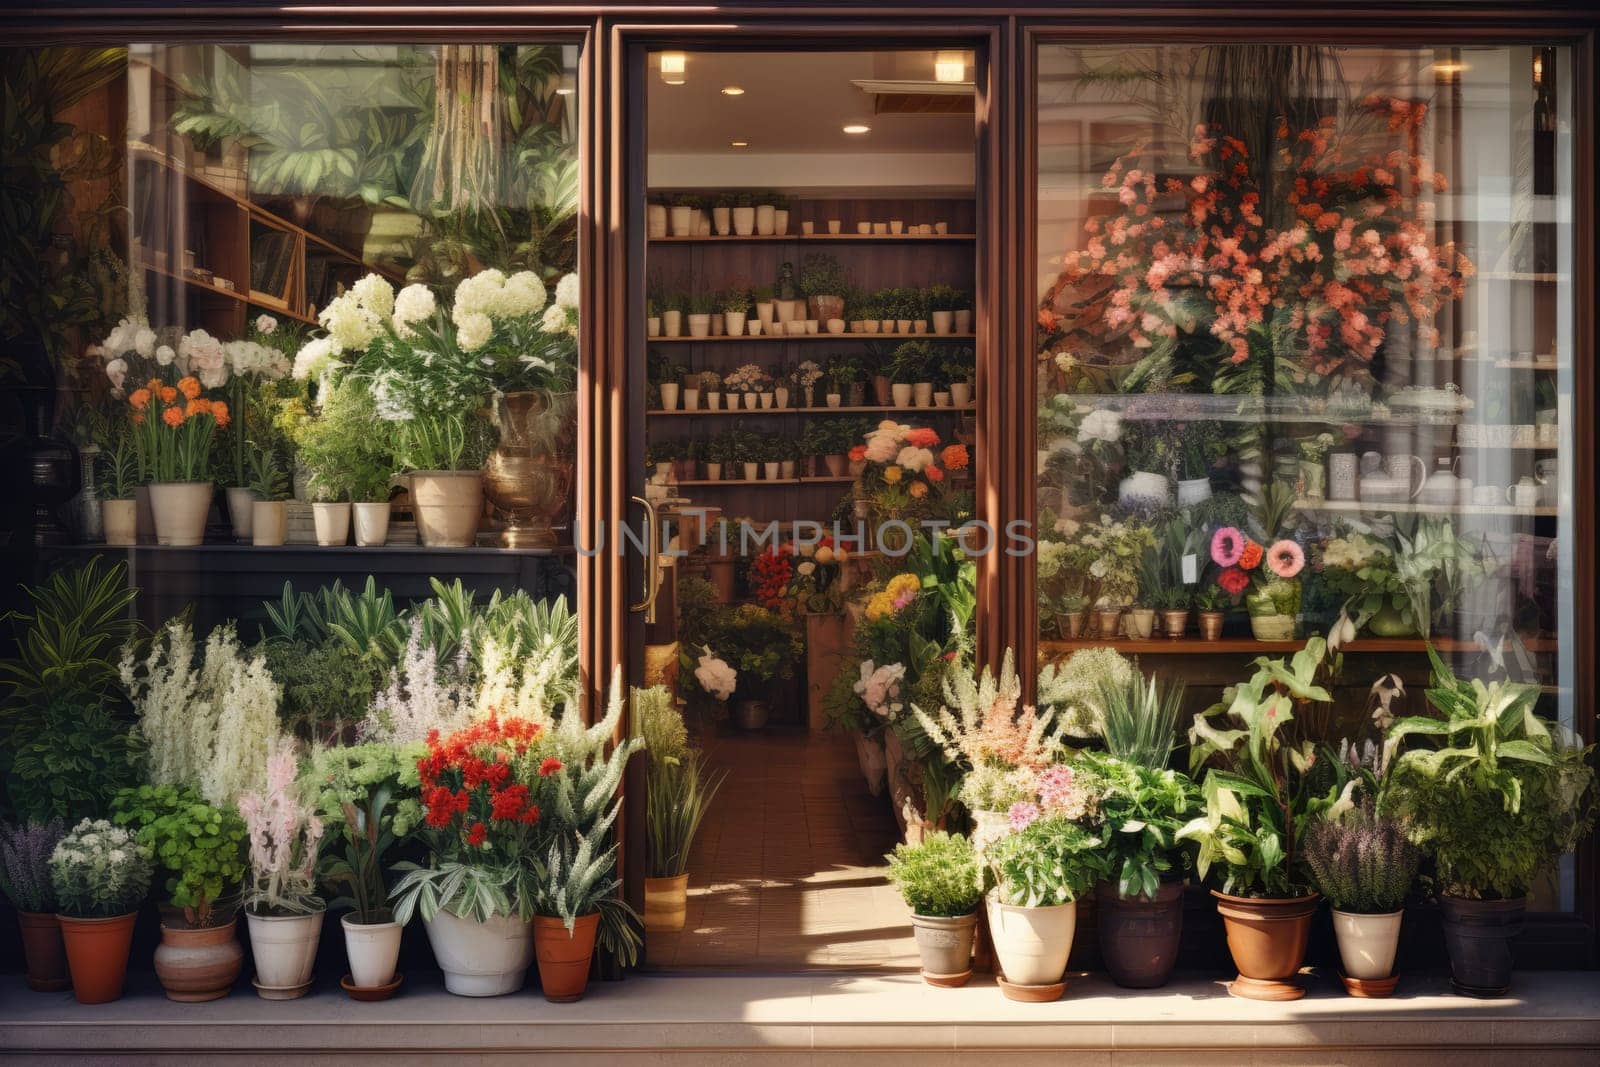 Flower shop window with flowers in pots and flowering plants. Large window against the city background. by Ramanouskaya